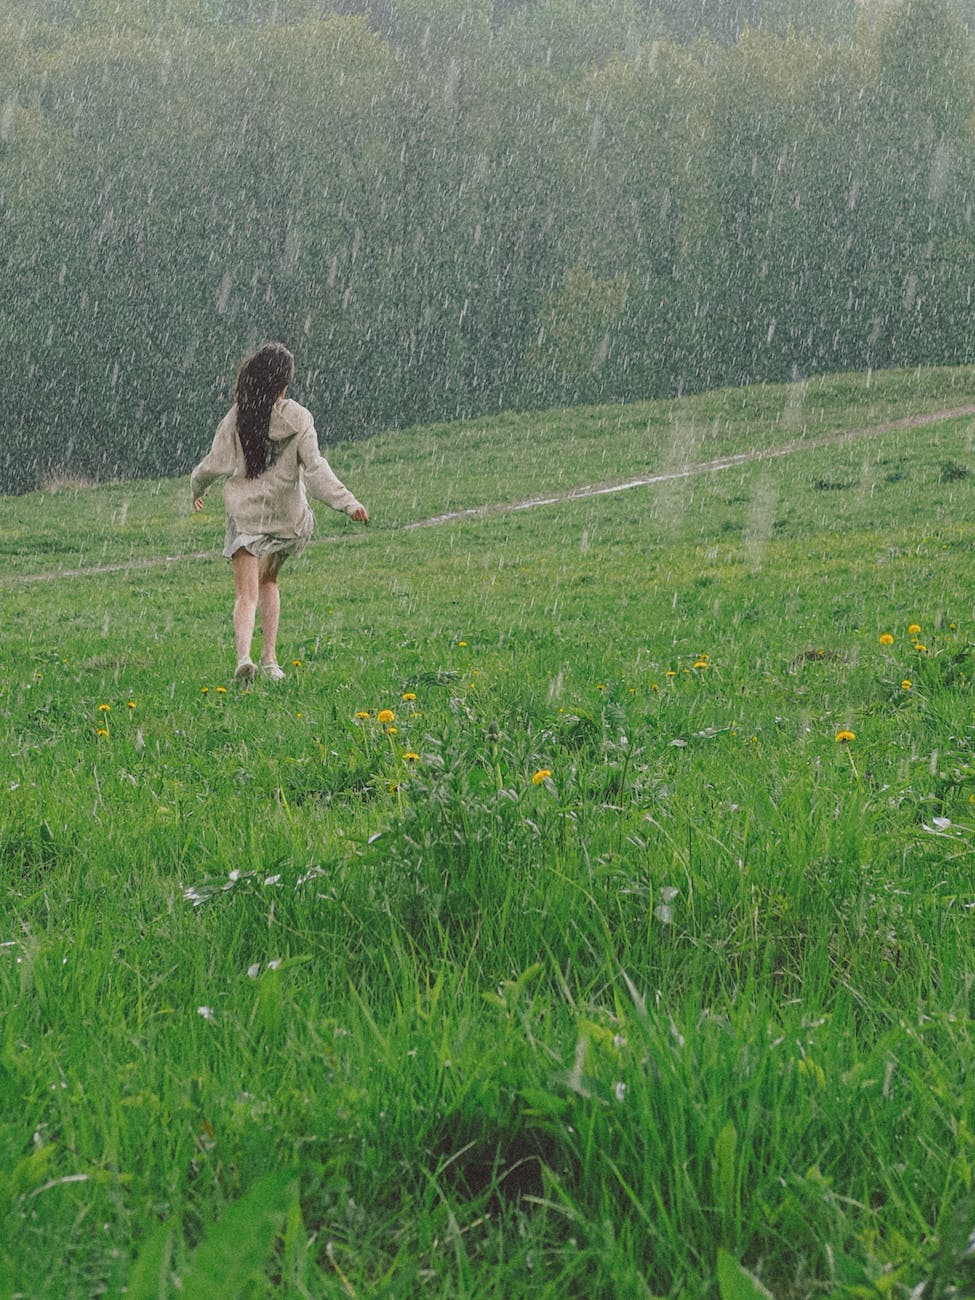 woman enjoying the rain outside a grass field showers of blessings